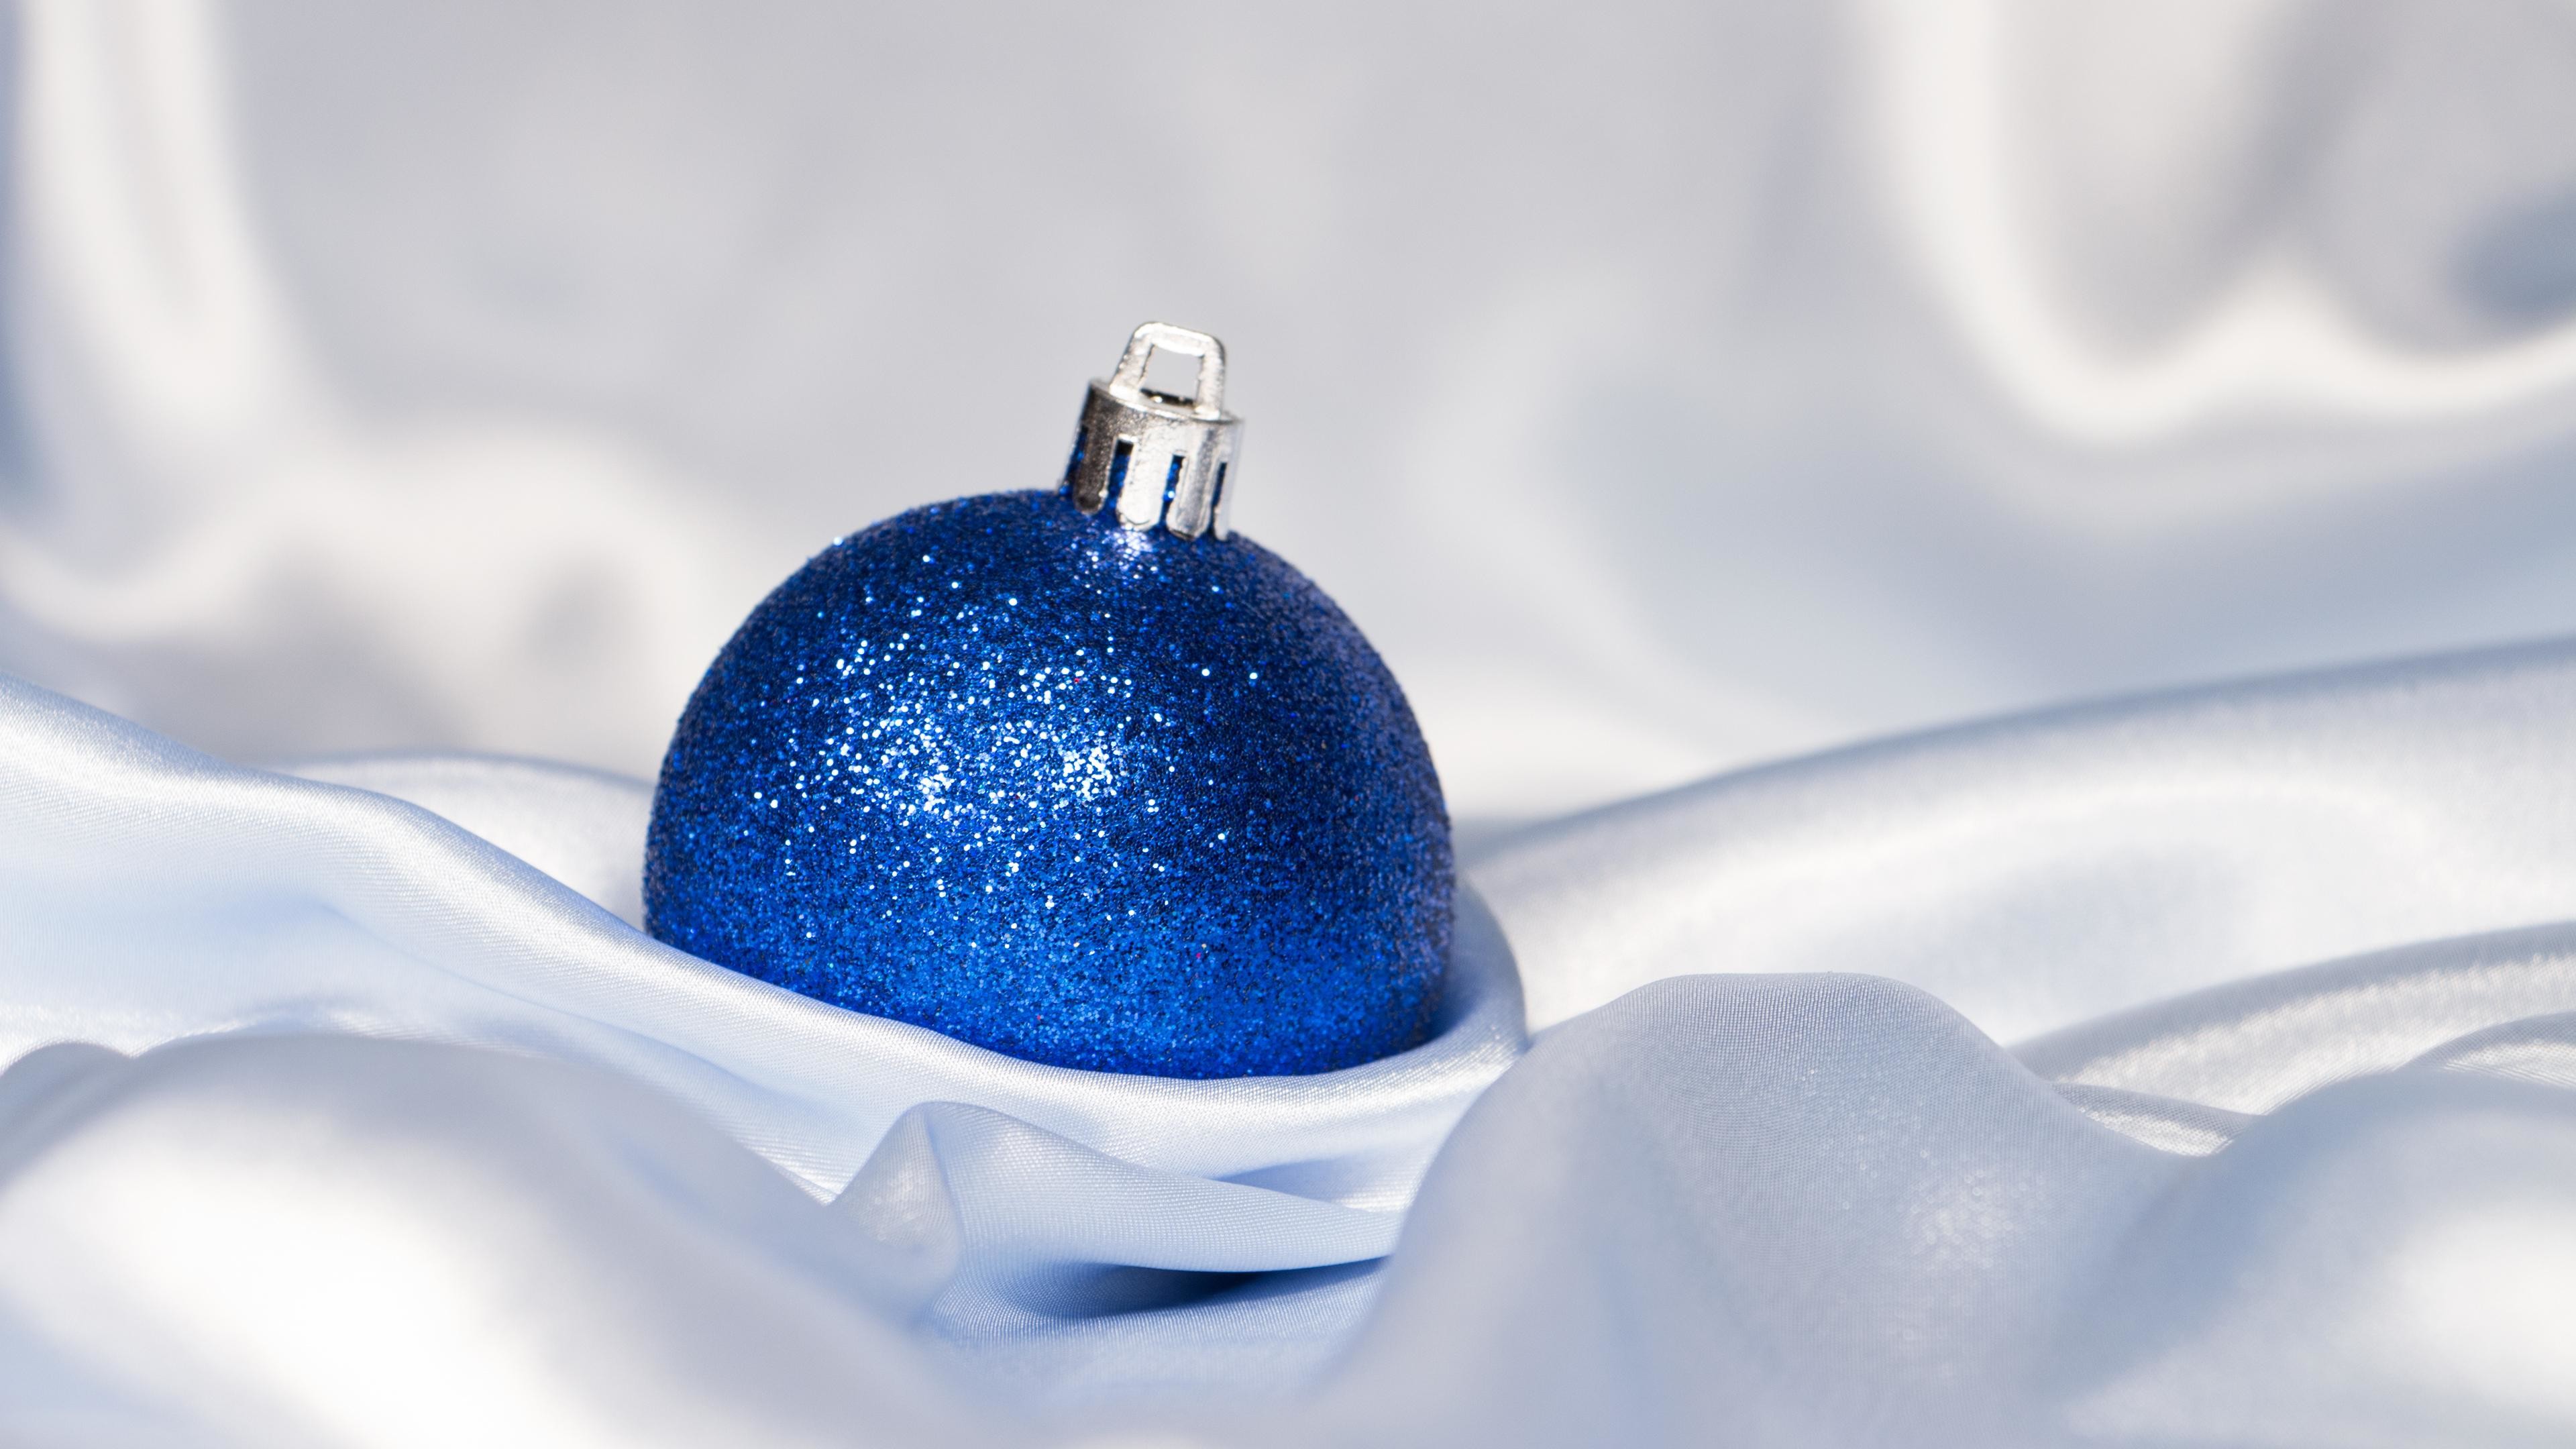 3840x2160 Blue Christmas bauble in silk